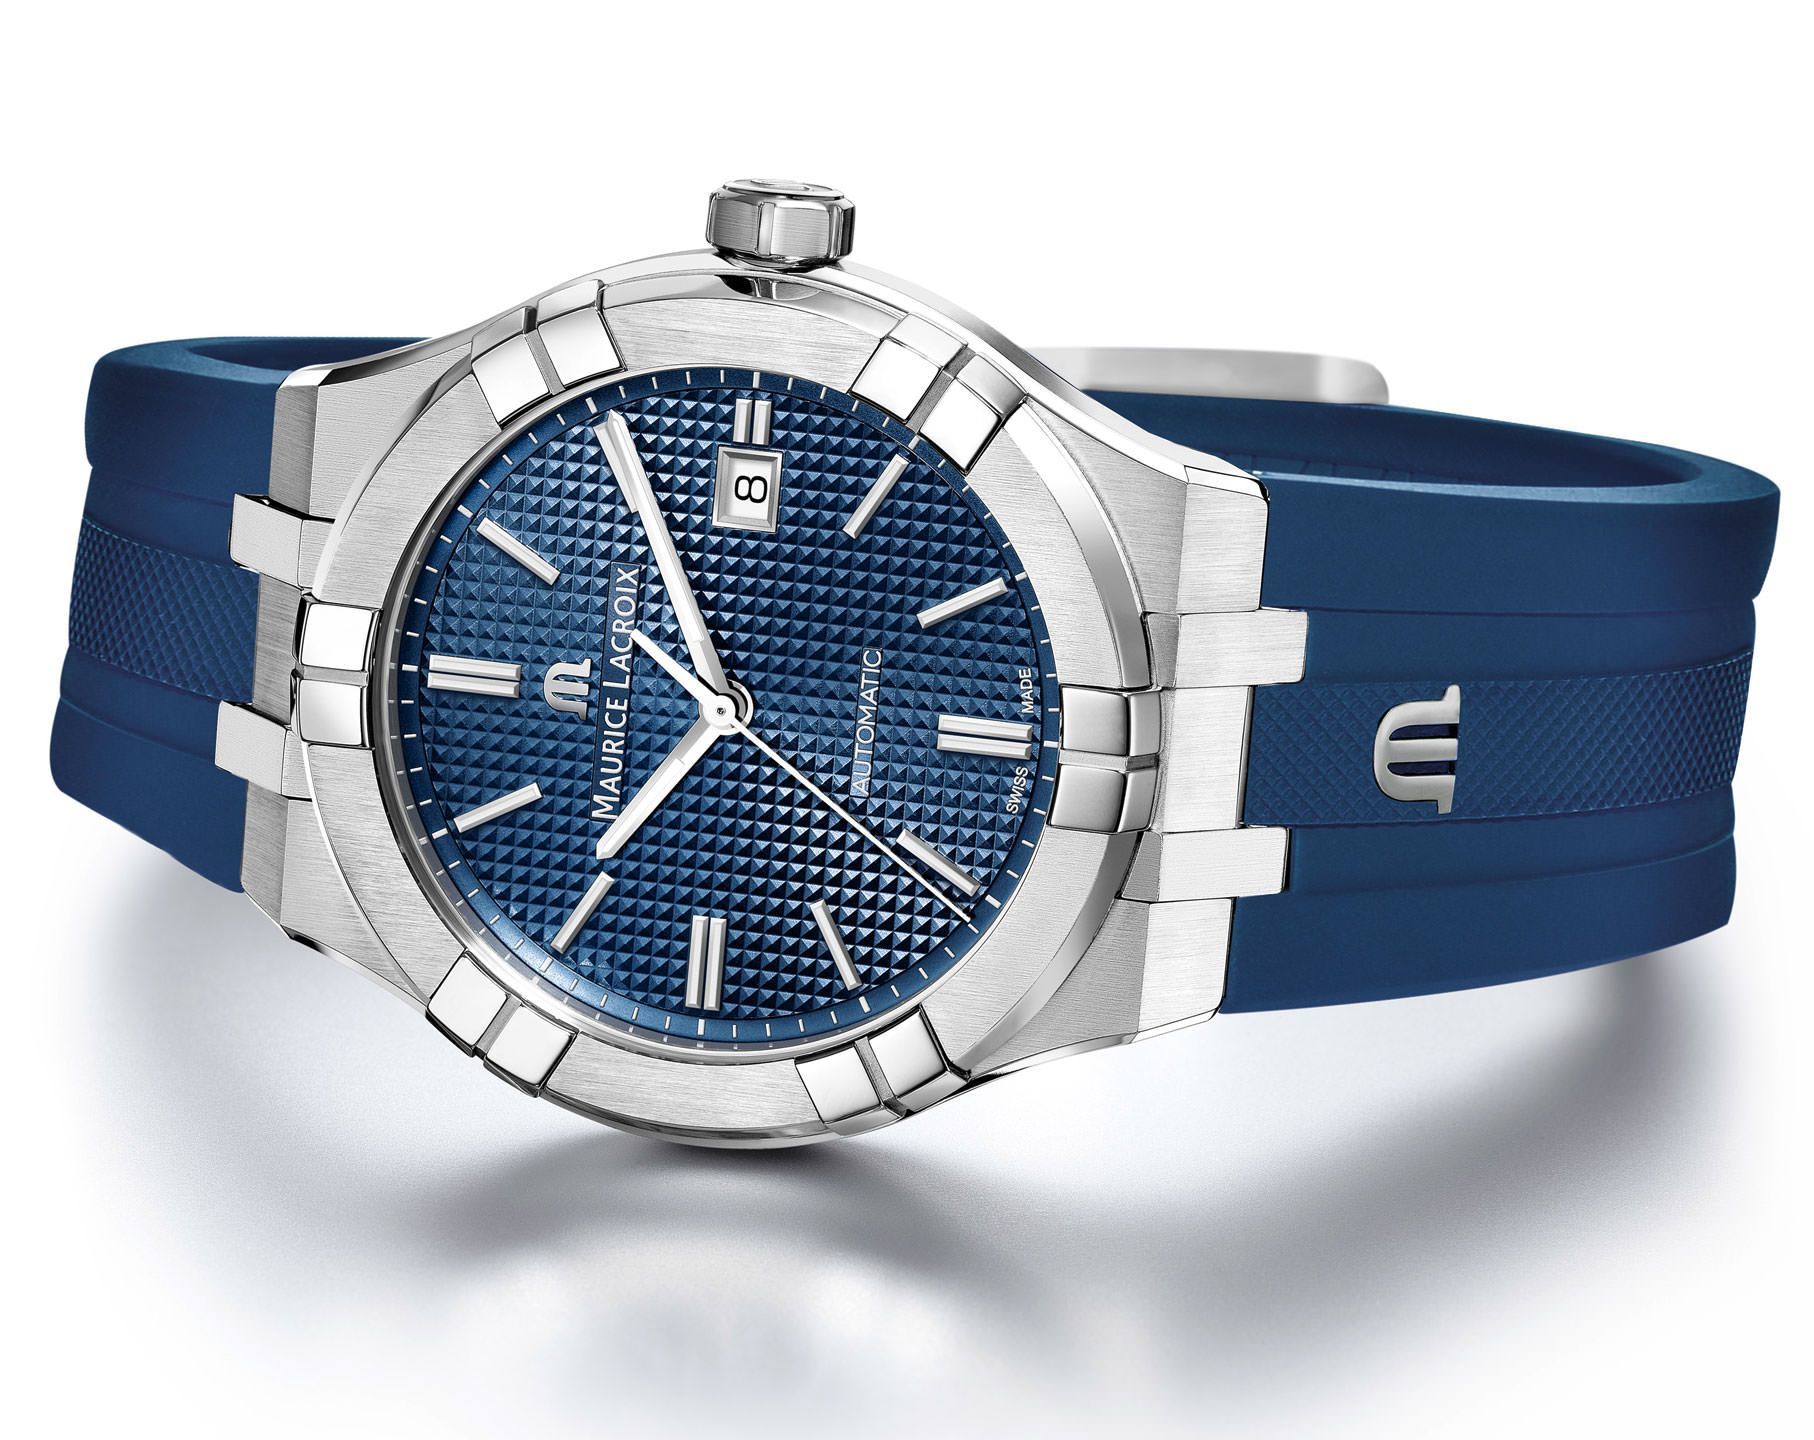 Maurice Lacroix Aikon Automatic 42 mm Watch in Blue Dial